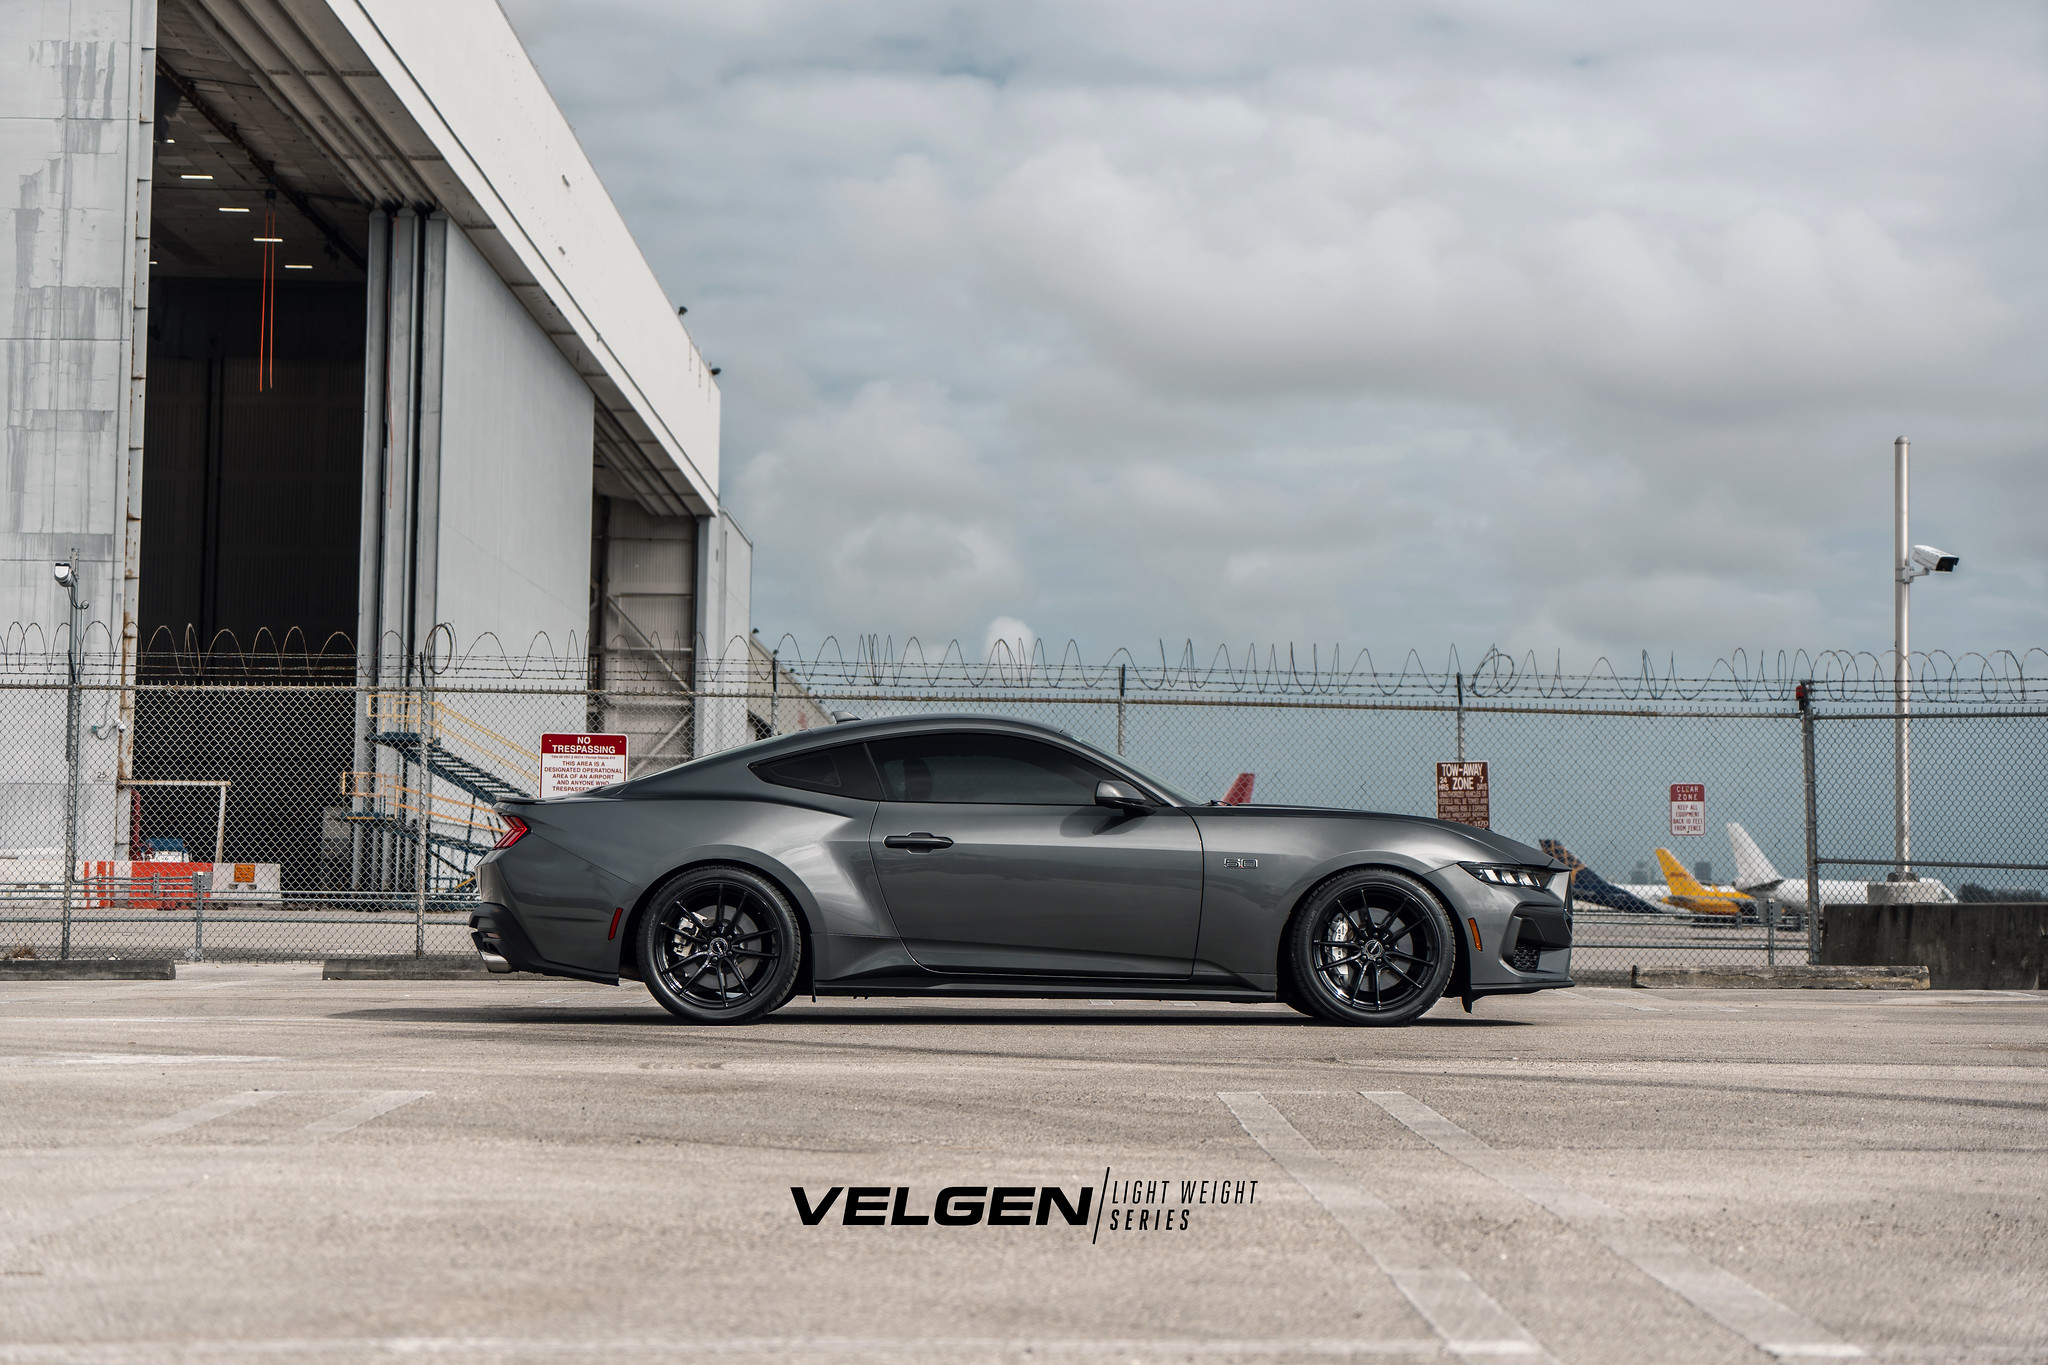 S650 Mustang 19" 20" Velgen Flow Forged Concave Wheels Mustang S650 - Vibe Motorsports Official Thread 53544125184_e765c8ed8d_k